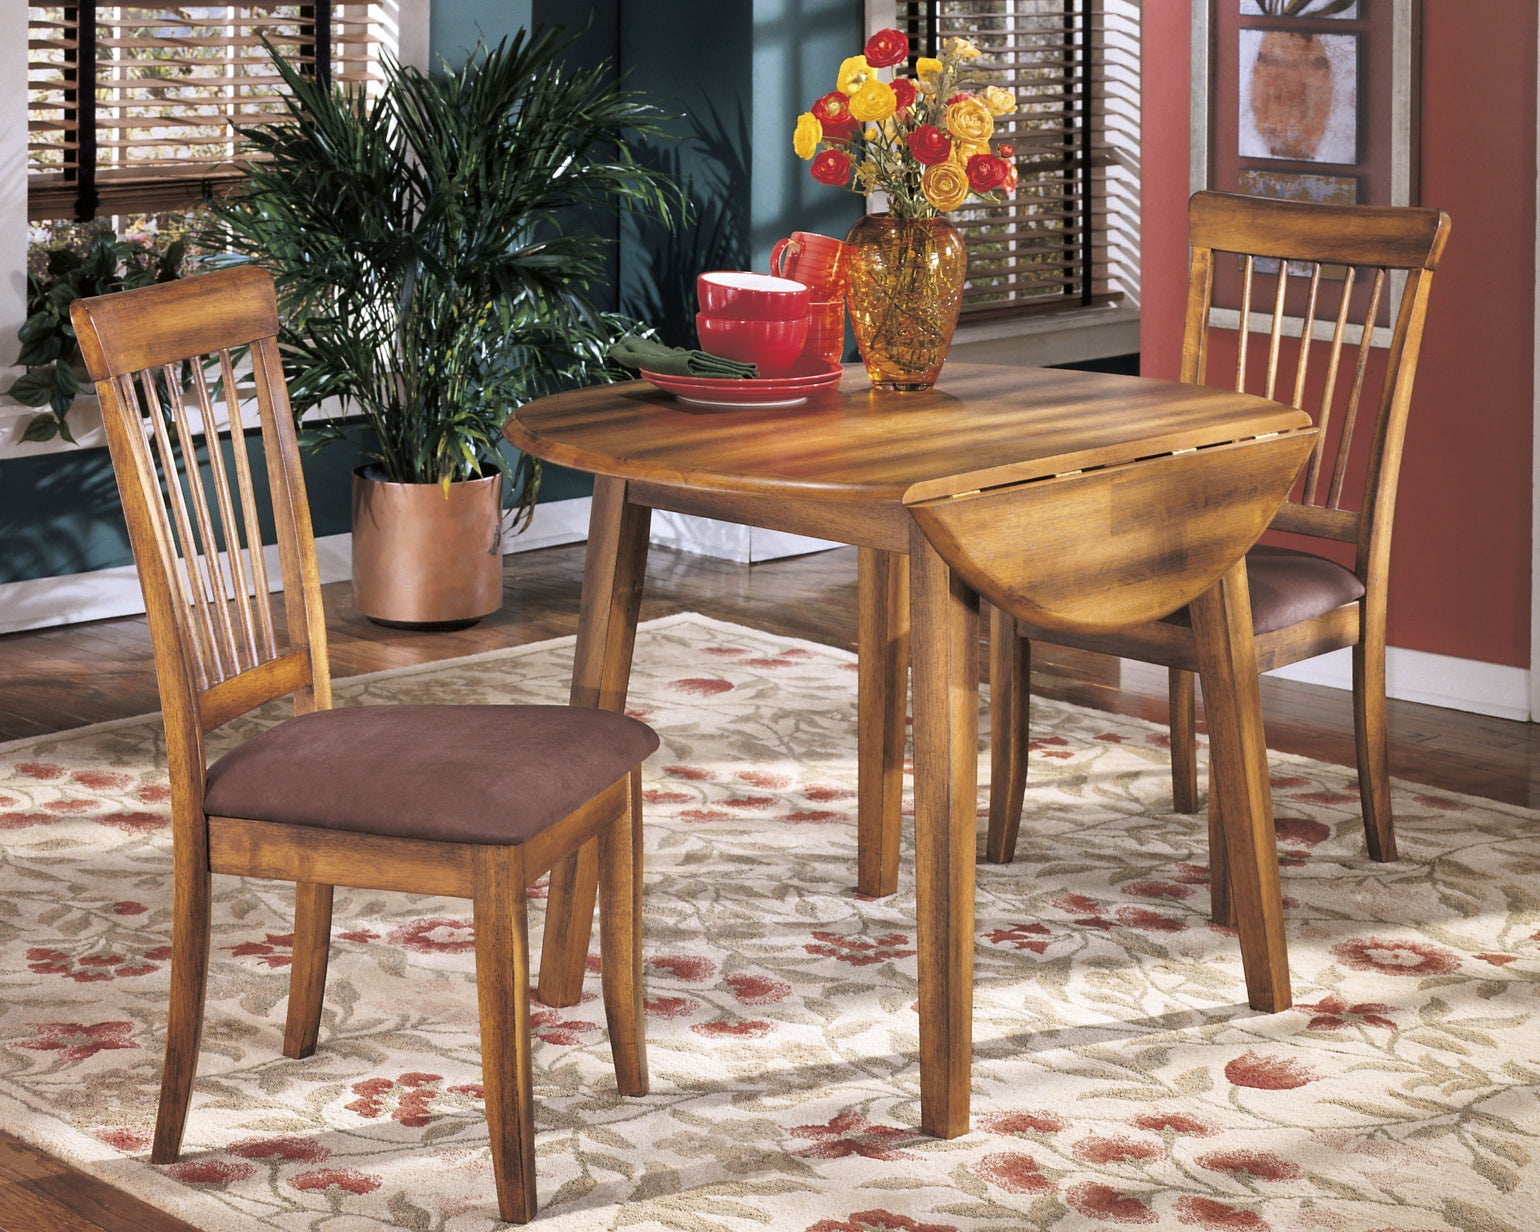 Berringer Round DRM Drop Leaf Table at Walker Mattress and Furniture Locations in Cedar Park and Belton TX.